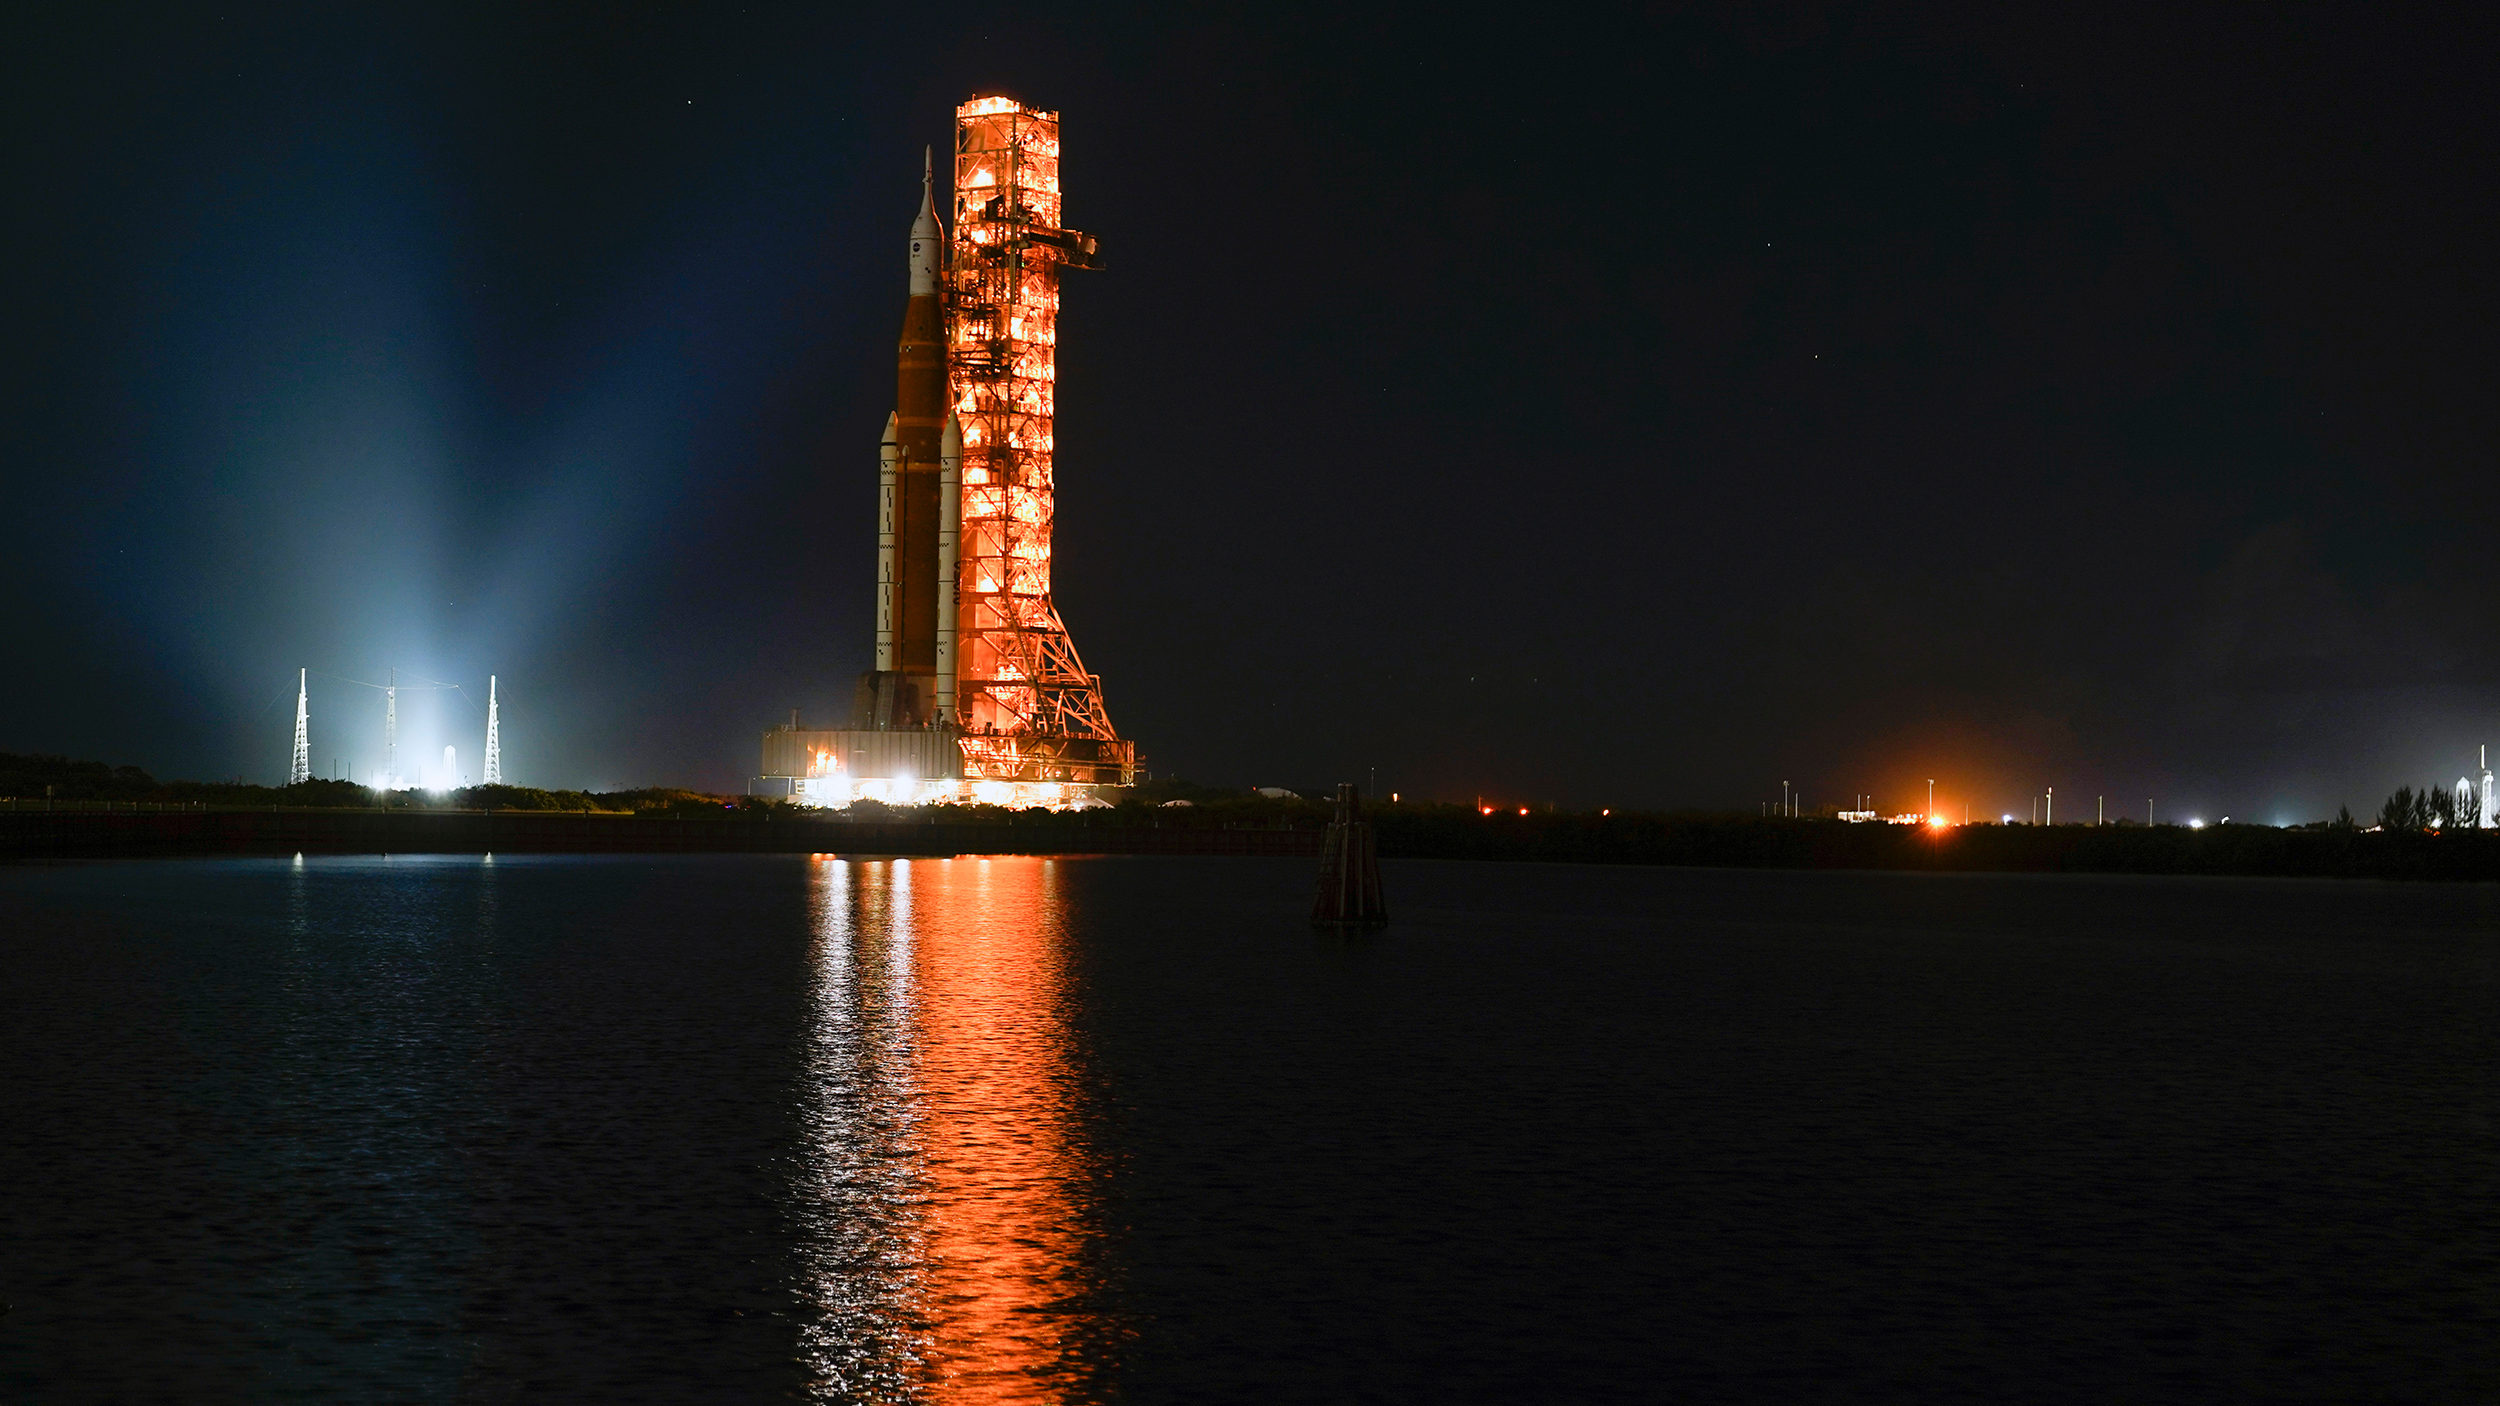 The NASA Space Launch System rocket makes its way from the Vehicle Assembly Building to its launchp...